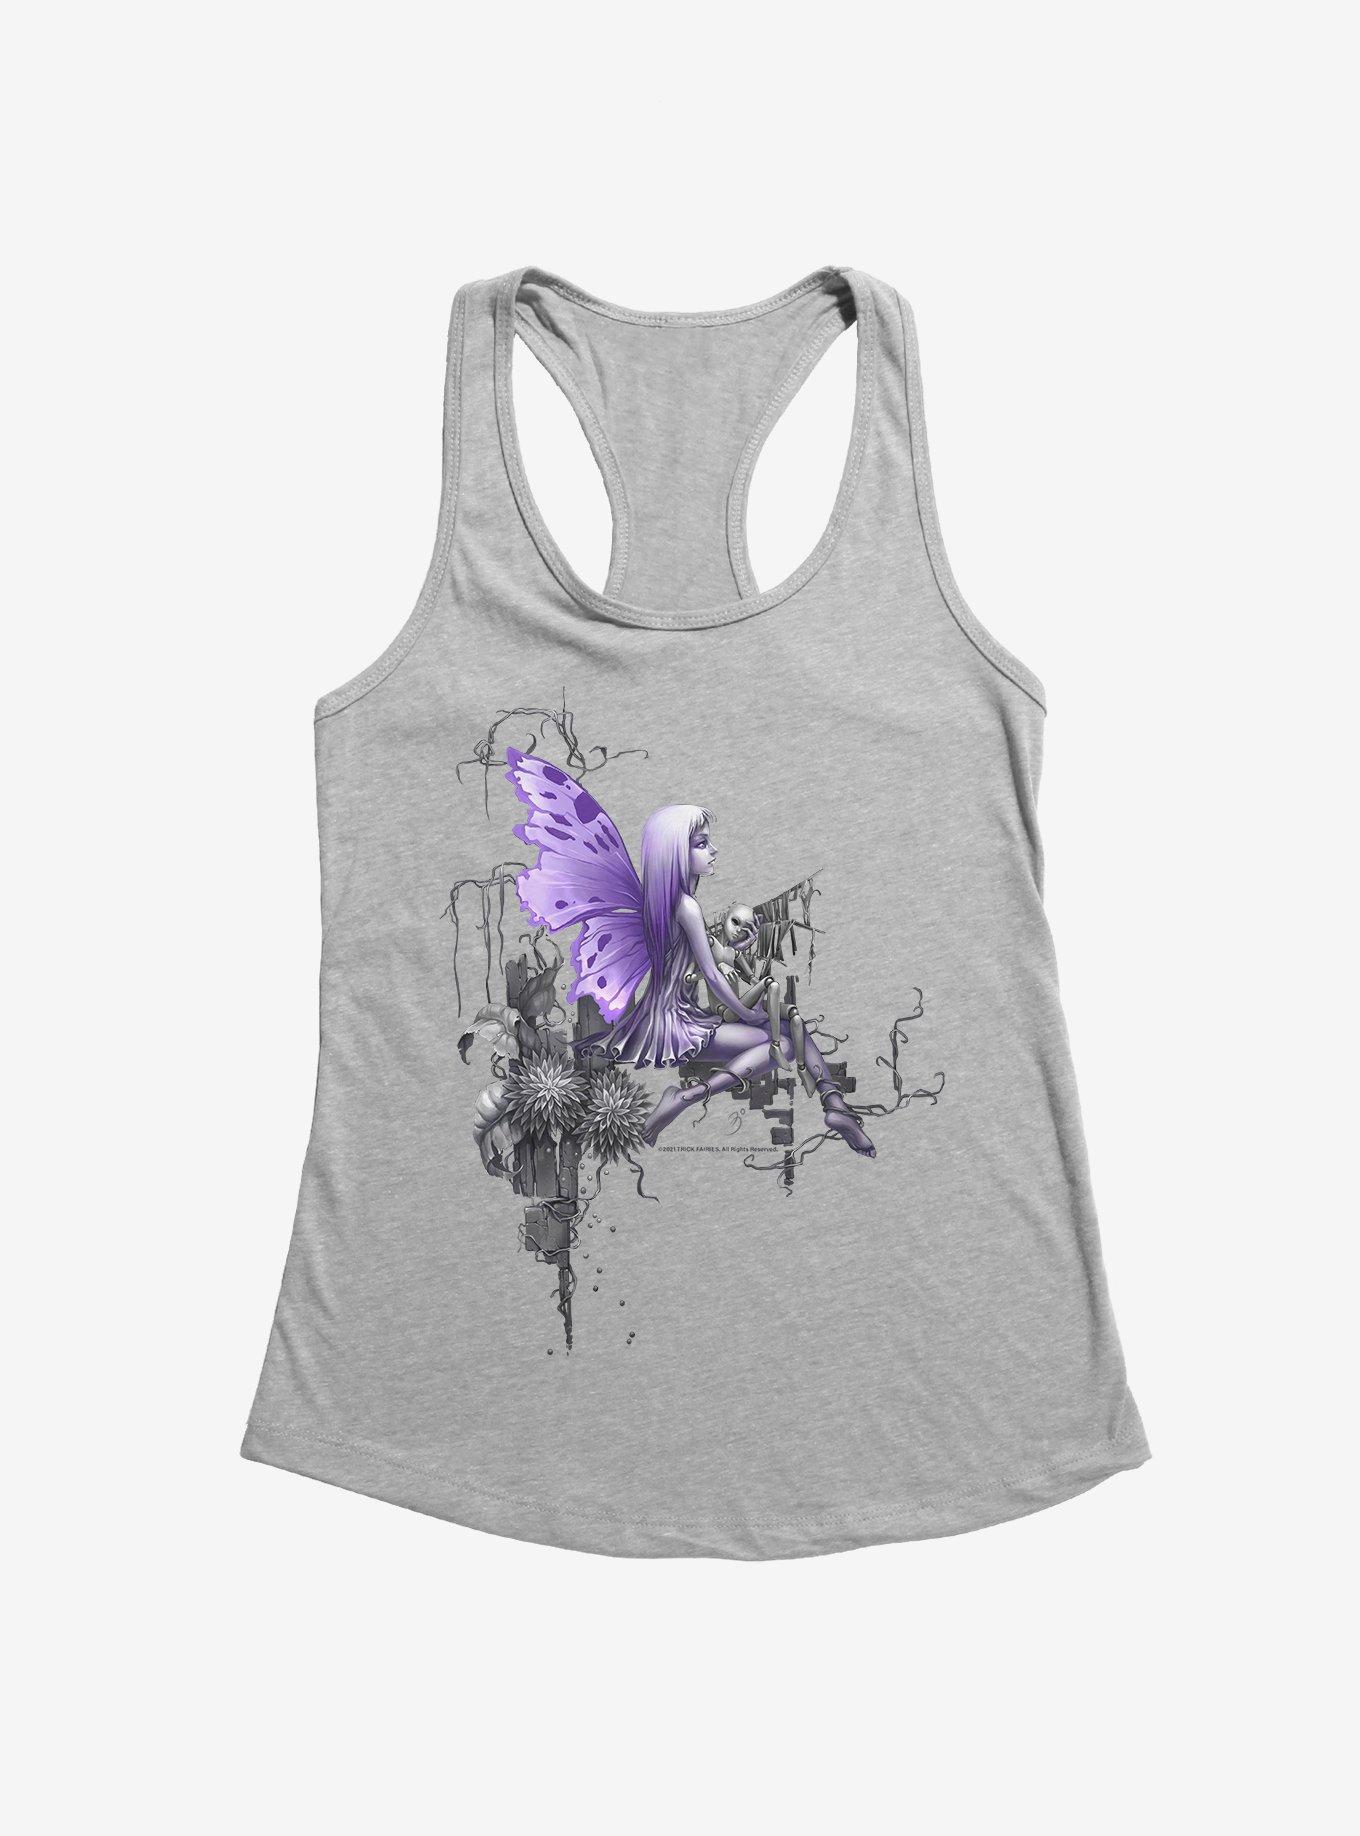 Fairies By Trick Baby Fairy Girls Tank, HEATHER, hi-res